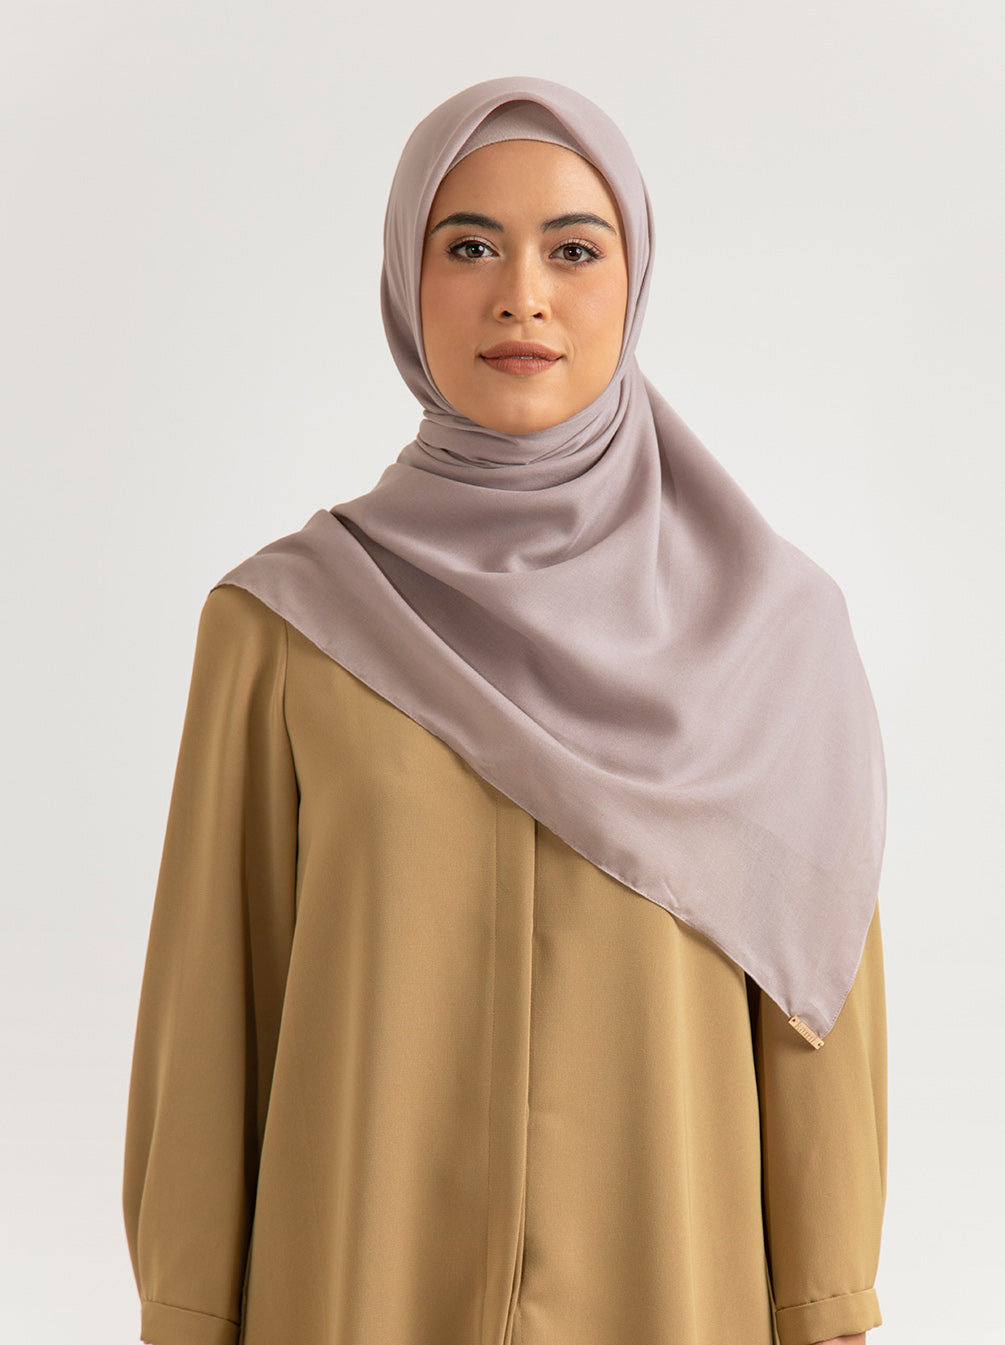 AIRY VOAL SCARF PLAIN FOVER